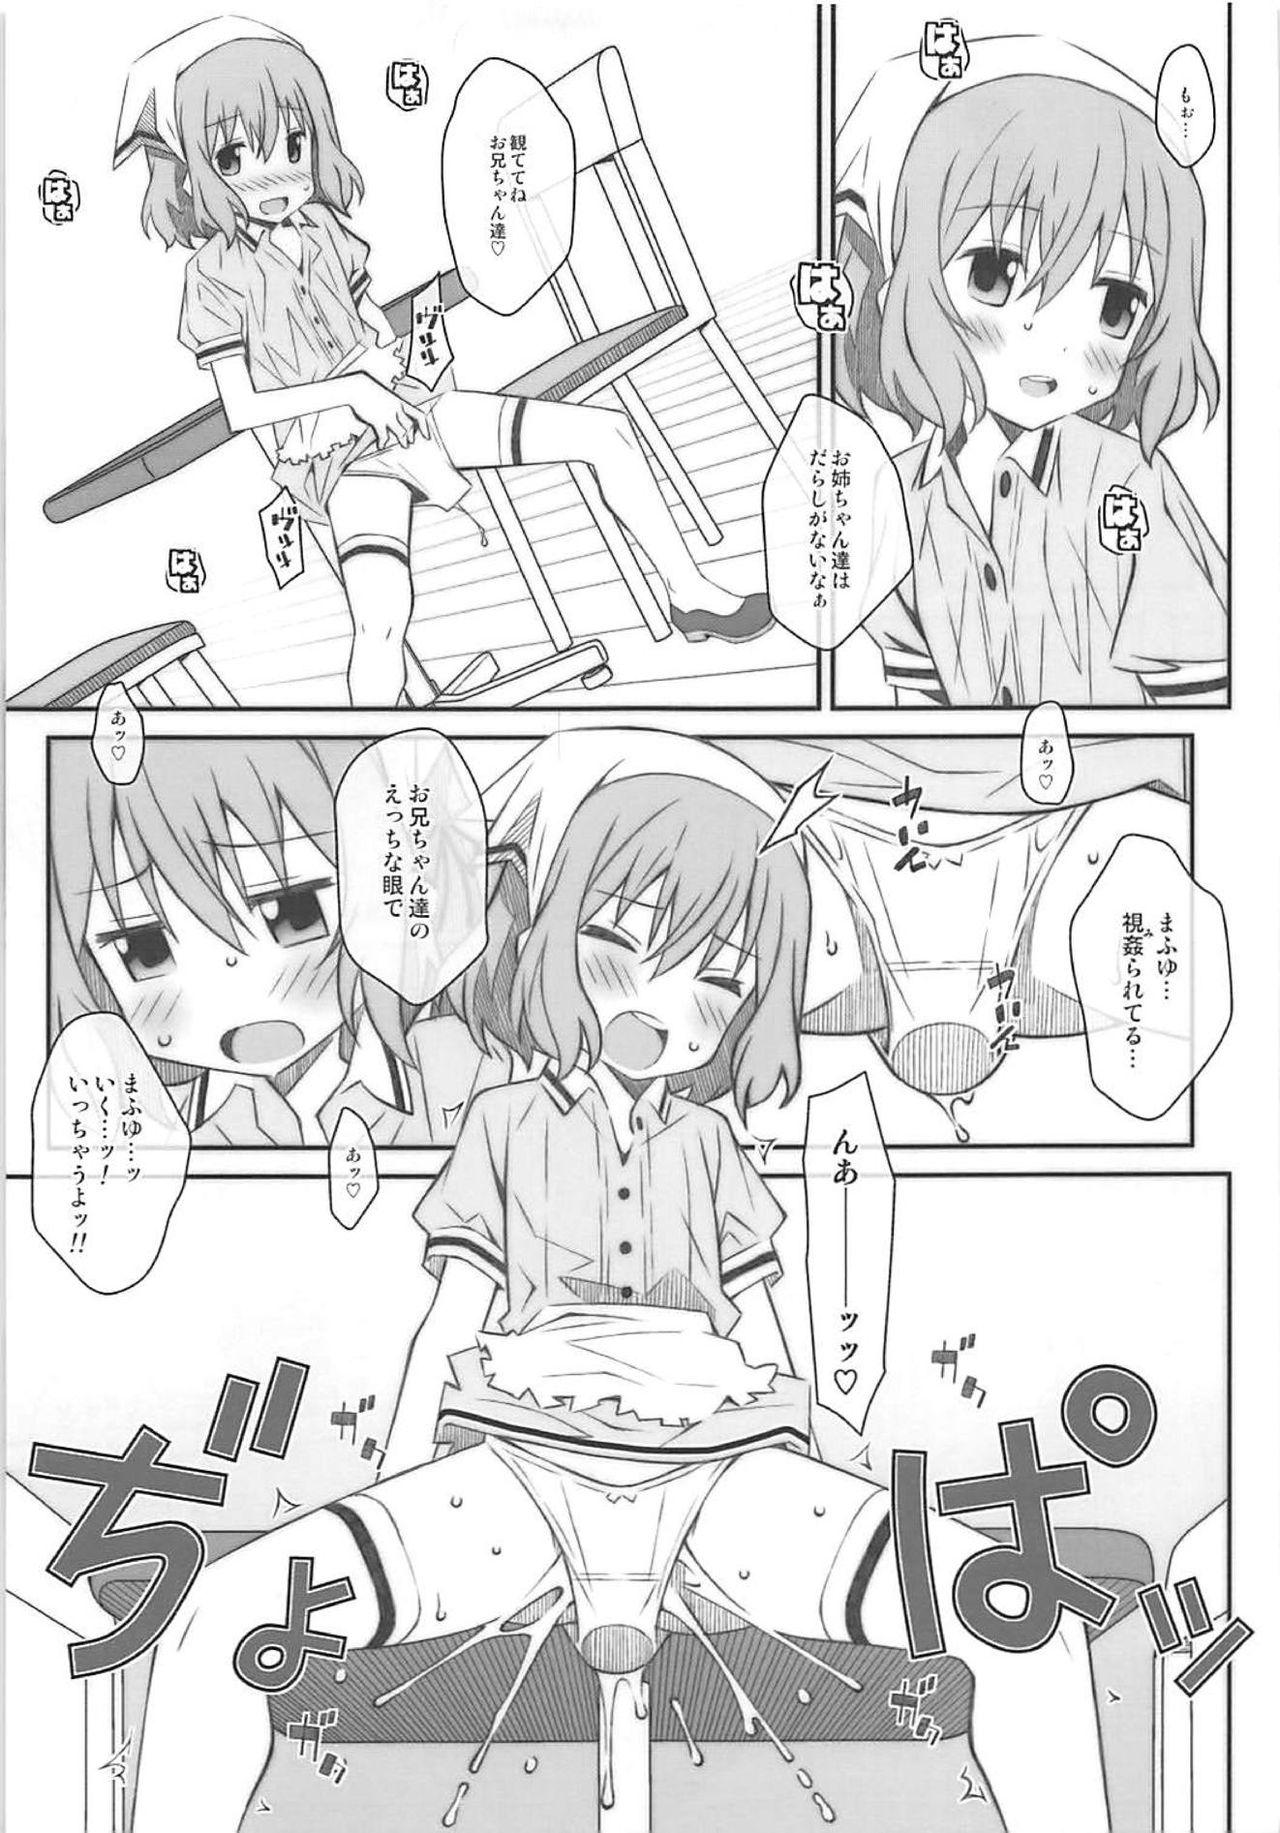 Carro TYPE-49 - Blend s Pounding - Page 8